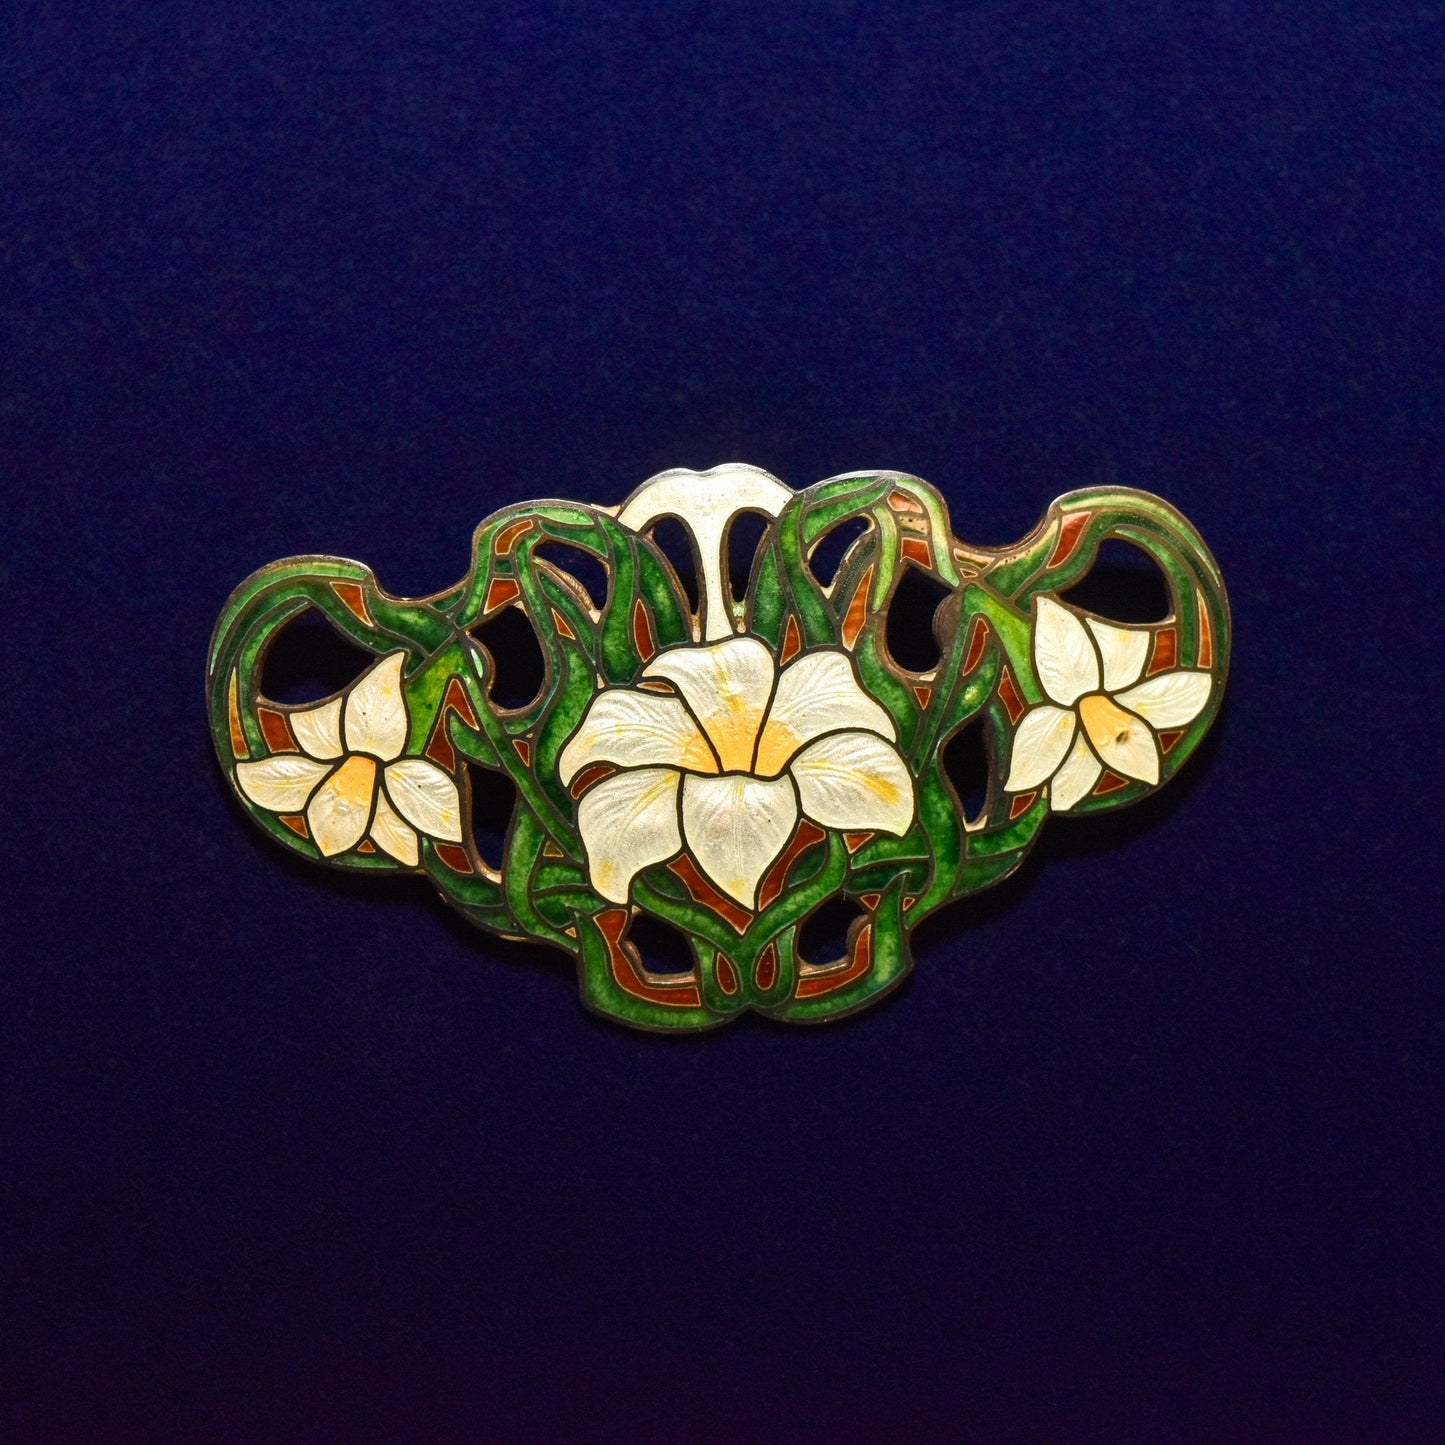 Sheffield Sterling Silver Guilloche Enamel Lily Brooch, Art Nouveau Jewelry, Valentines Day Gift, 2.875"